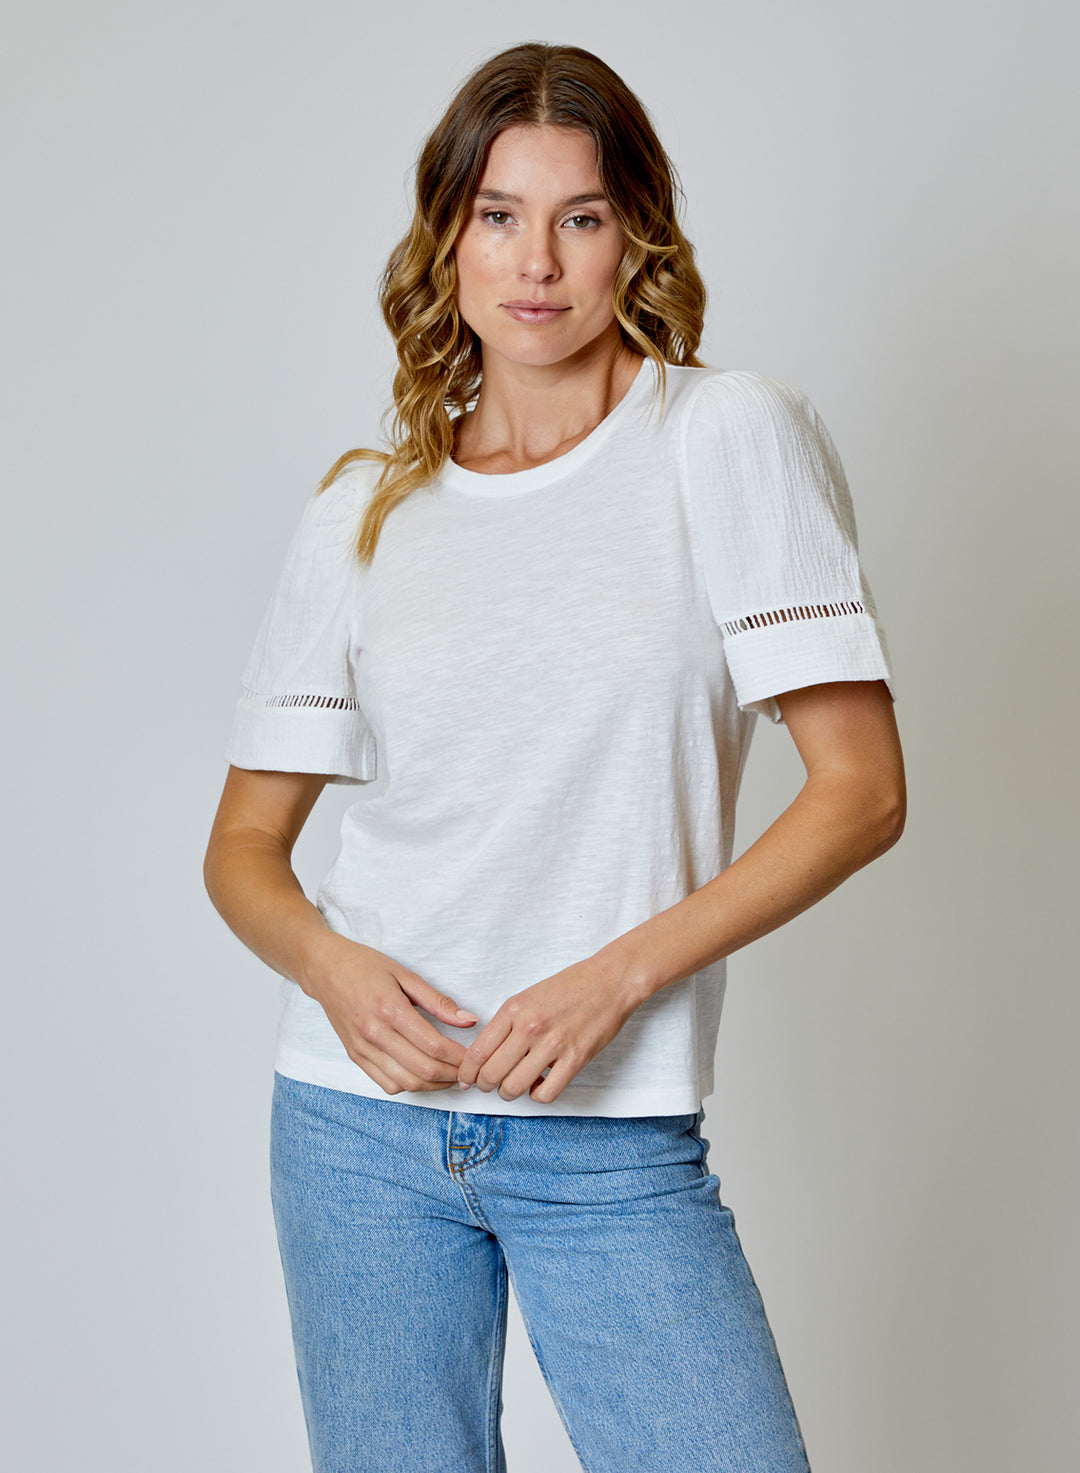 Tee with Sleeves | White